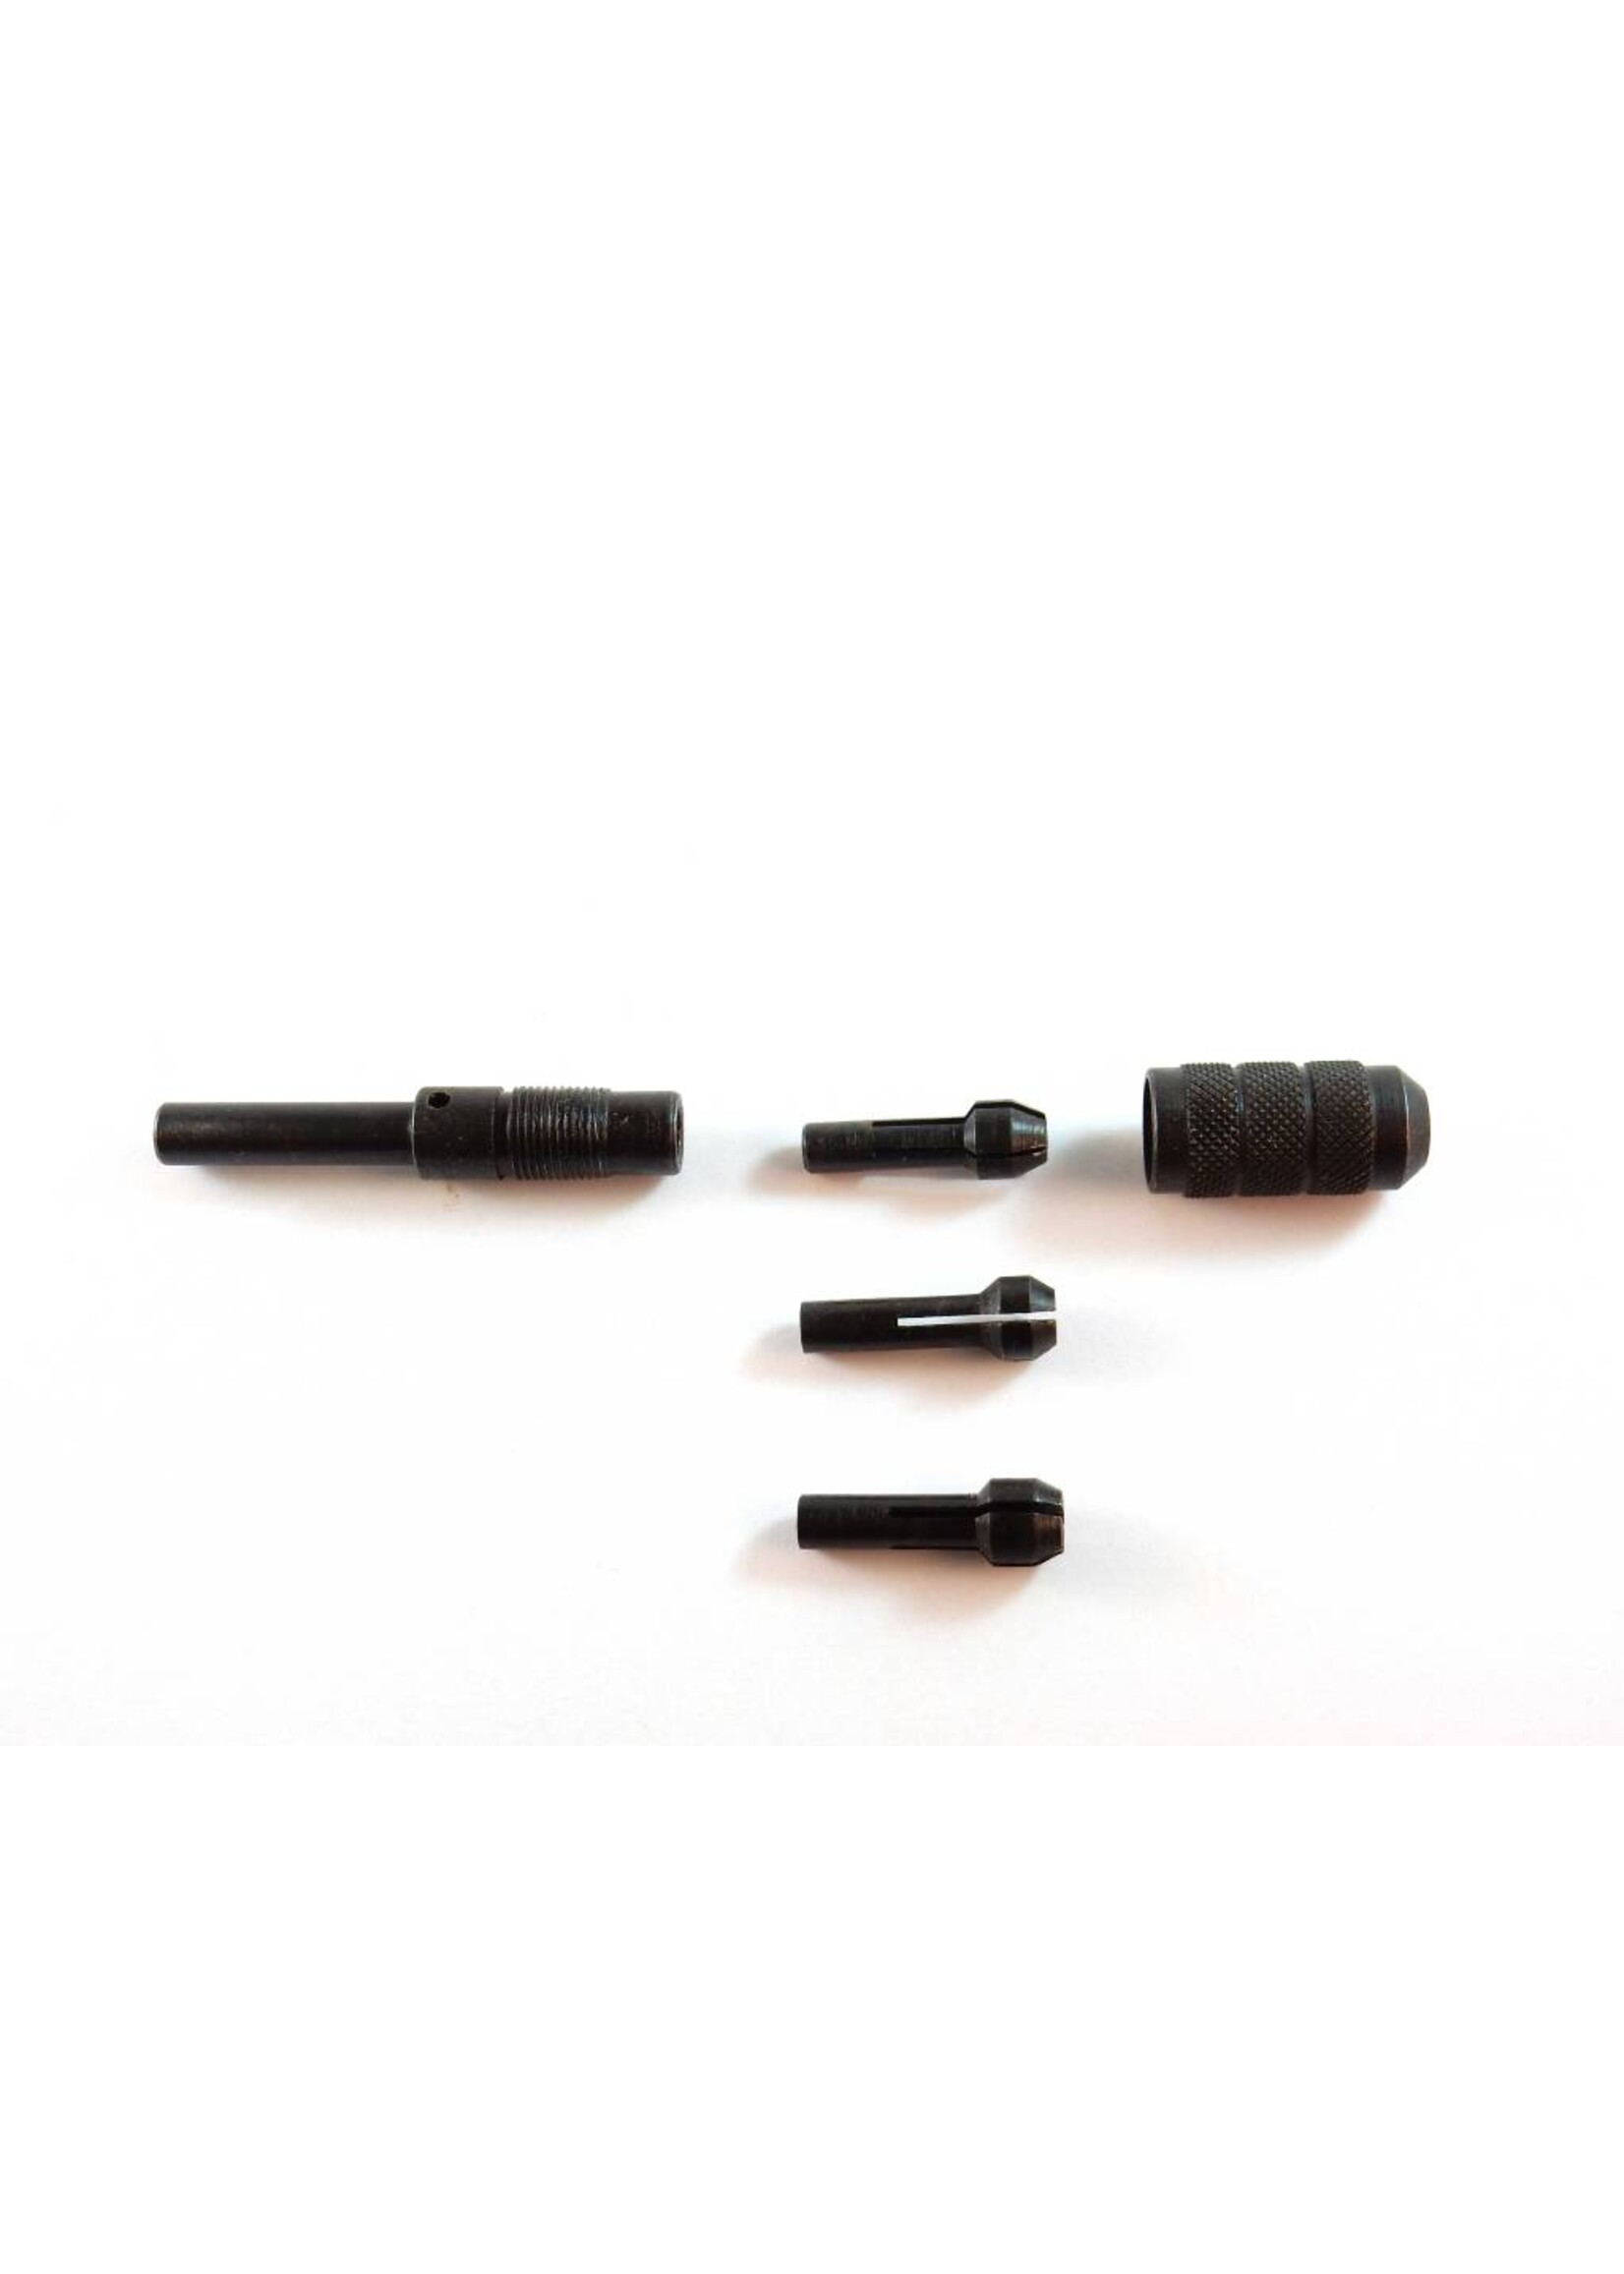 Mini collet holder with 3 collets